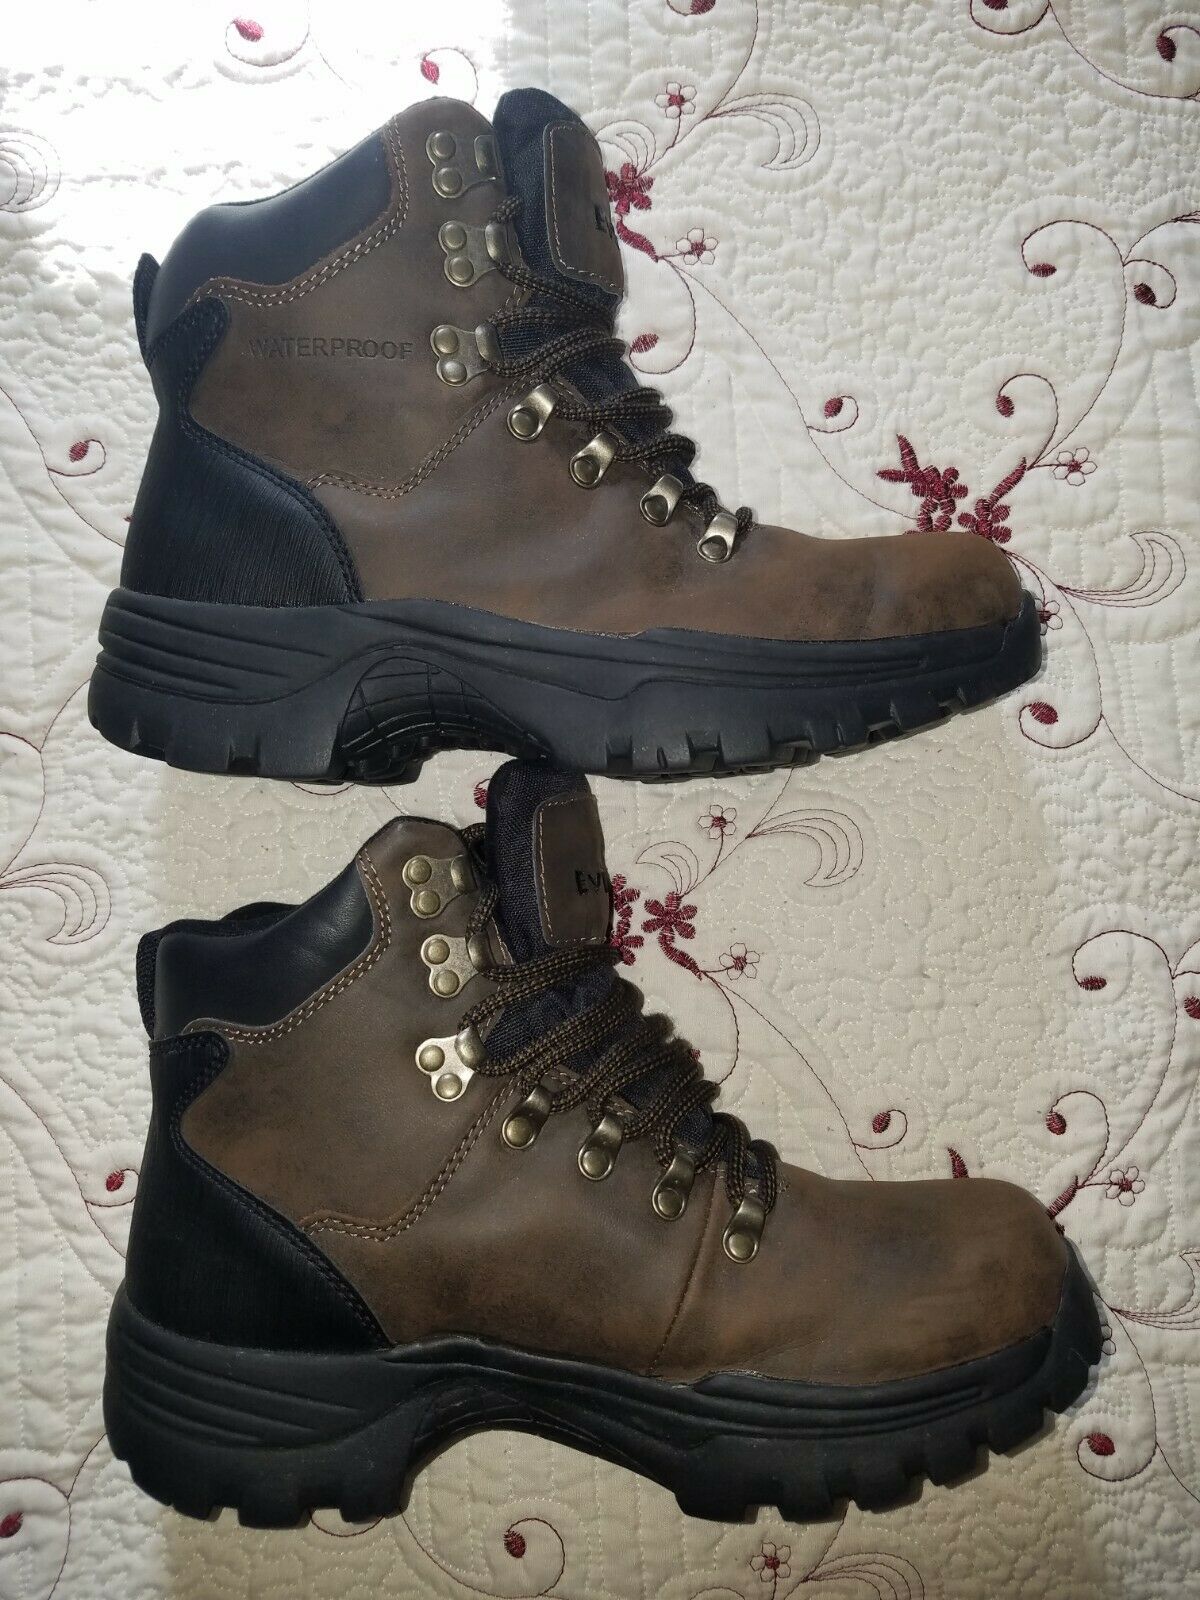 Everest Brand Men's Leather Waterproof Hiking Boots Size 8.5